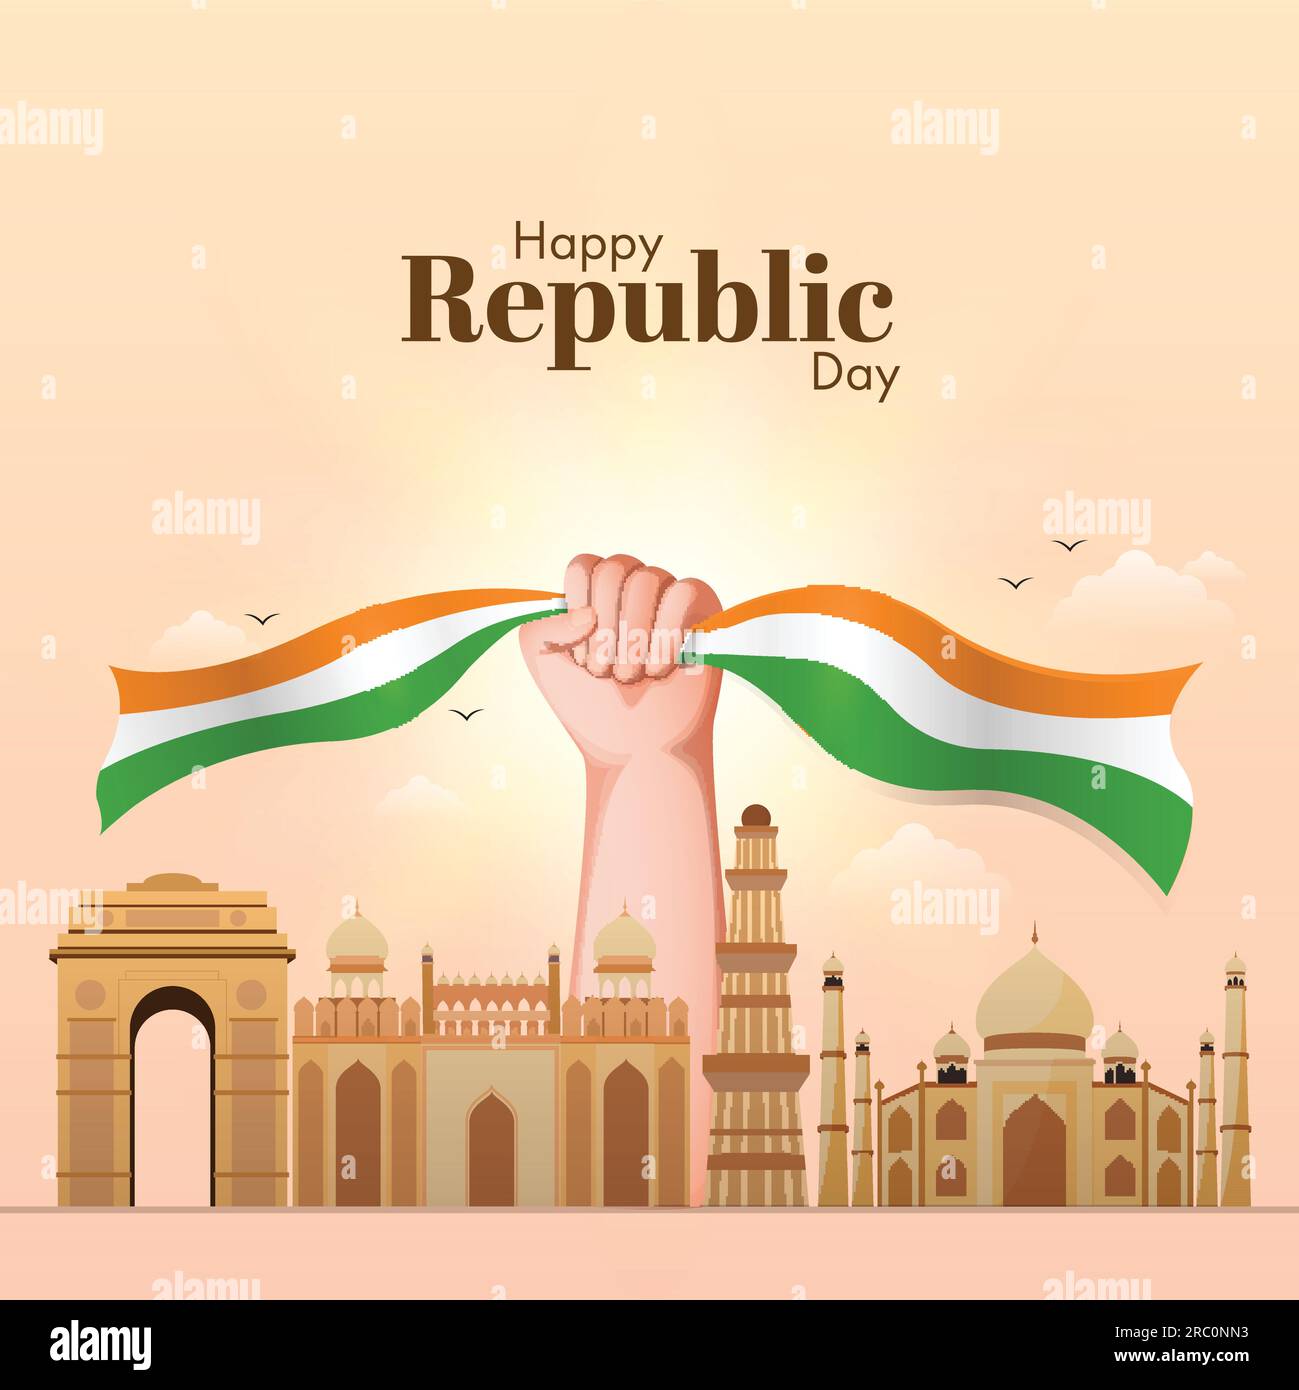 Happy Republic Day Concept With Hand Holding Tricolor Ribbon And India Famous Monuments On Peach Background. Stock Vector